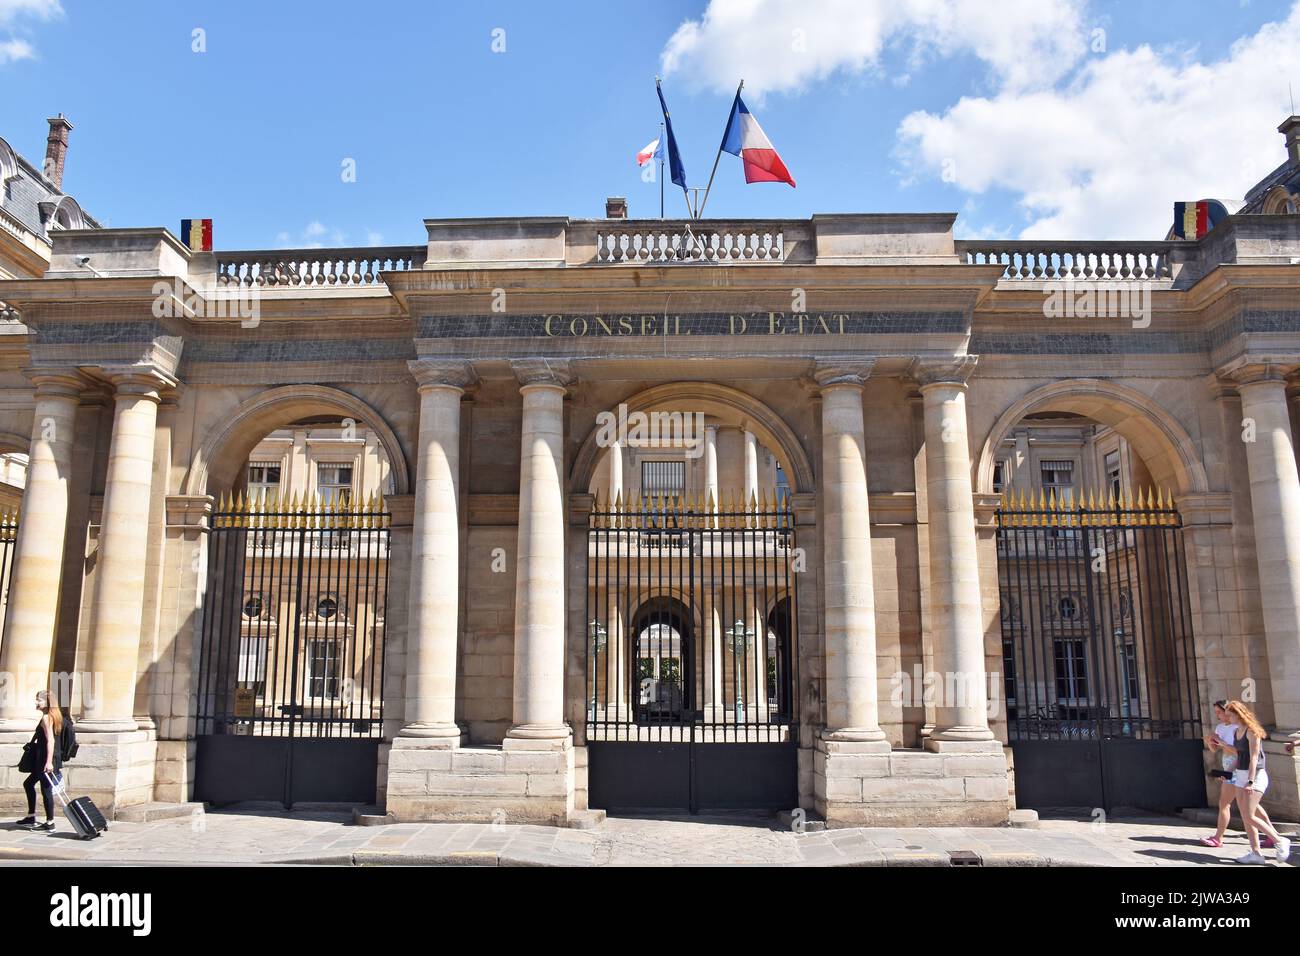 The screen of the southern entrance to the Palais Royale on r. St. Honoré, opening into the Cour de l’Horloge, & the building of the Conseil d'Etat Stock Photo